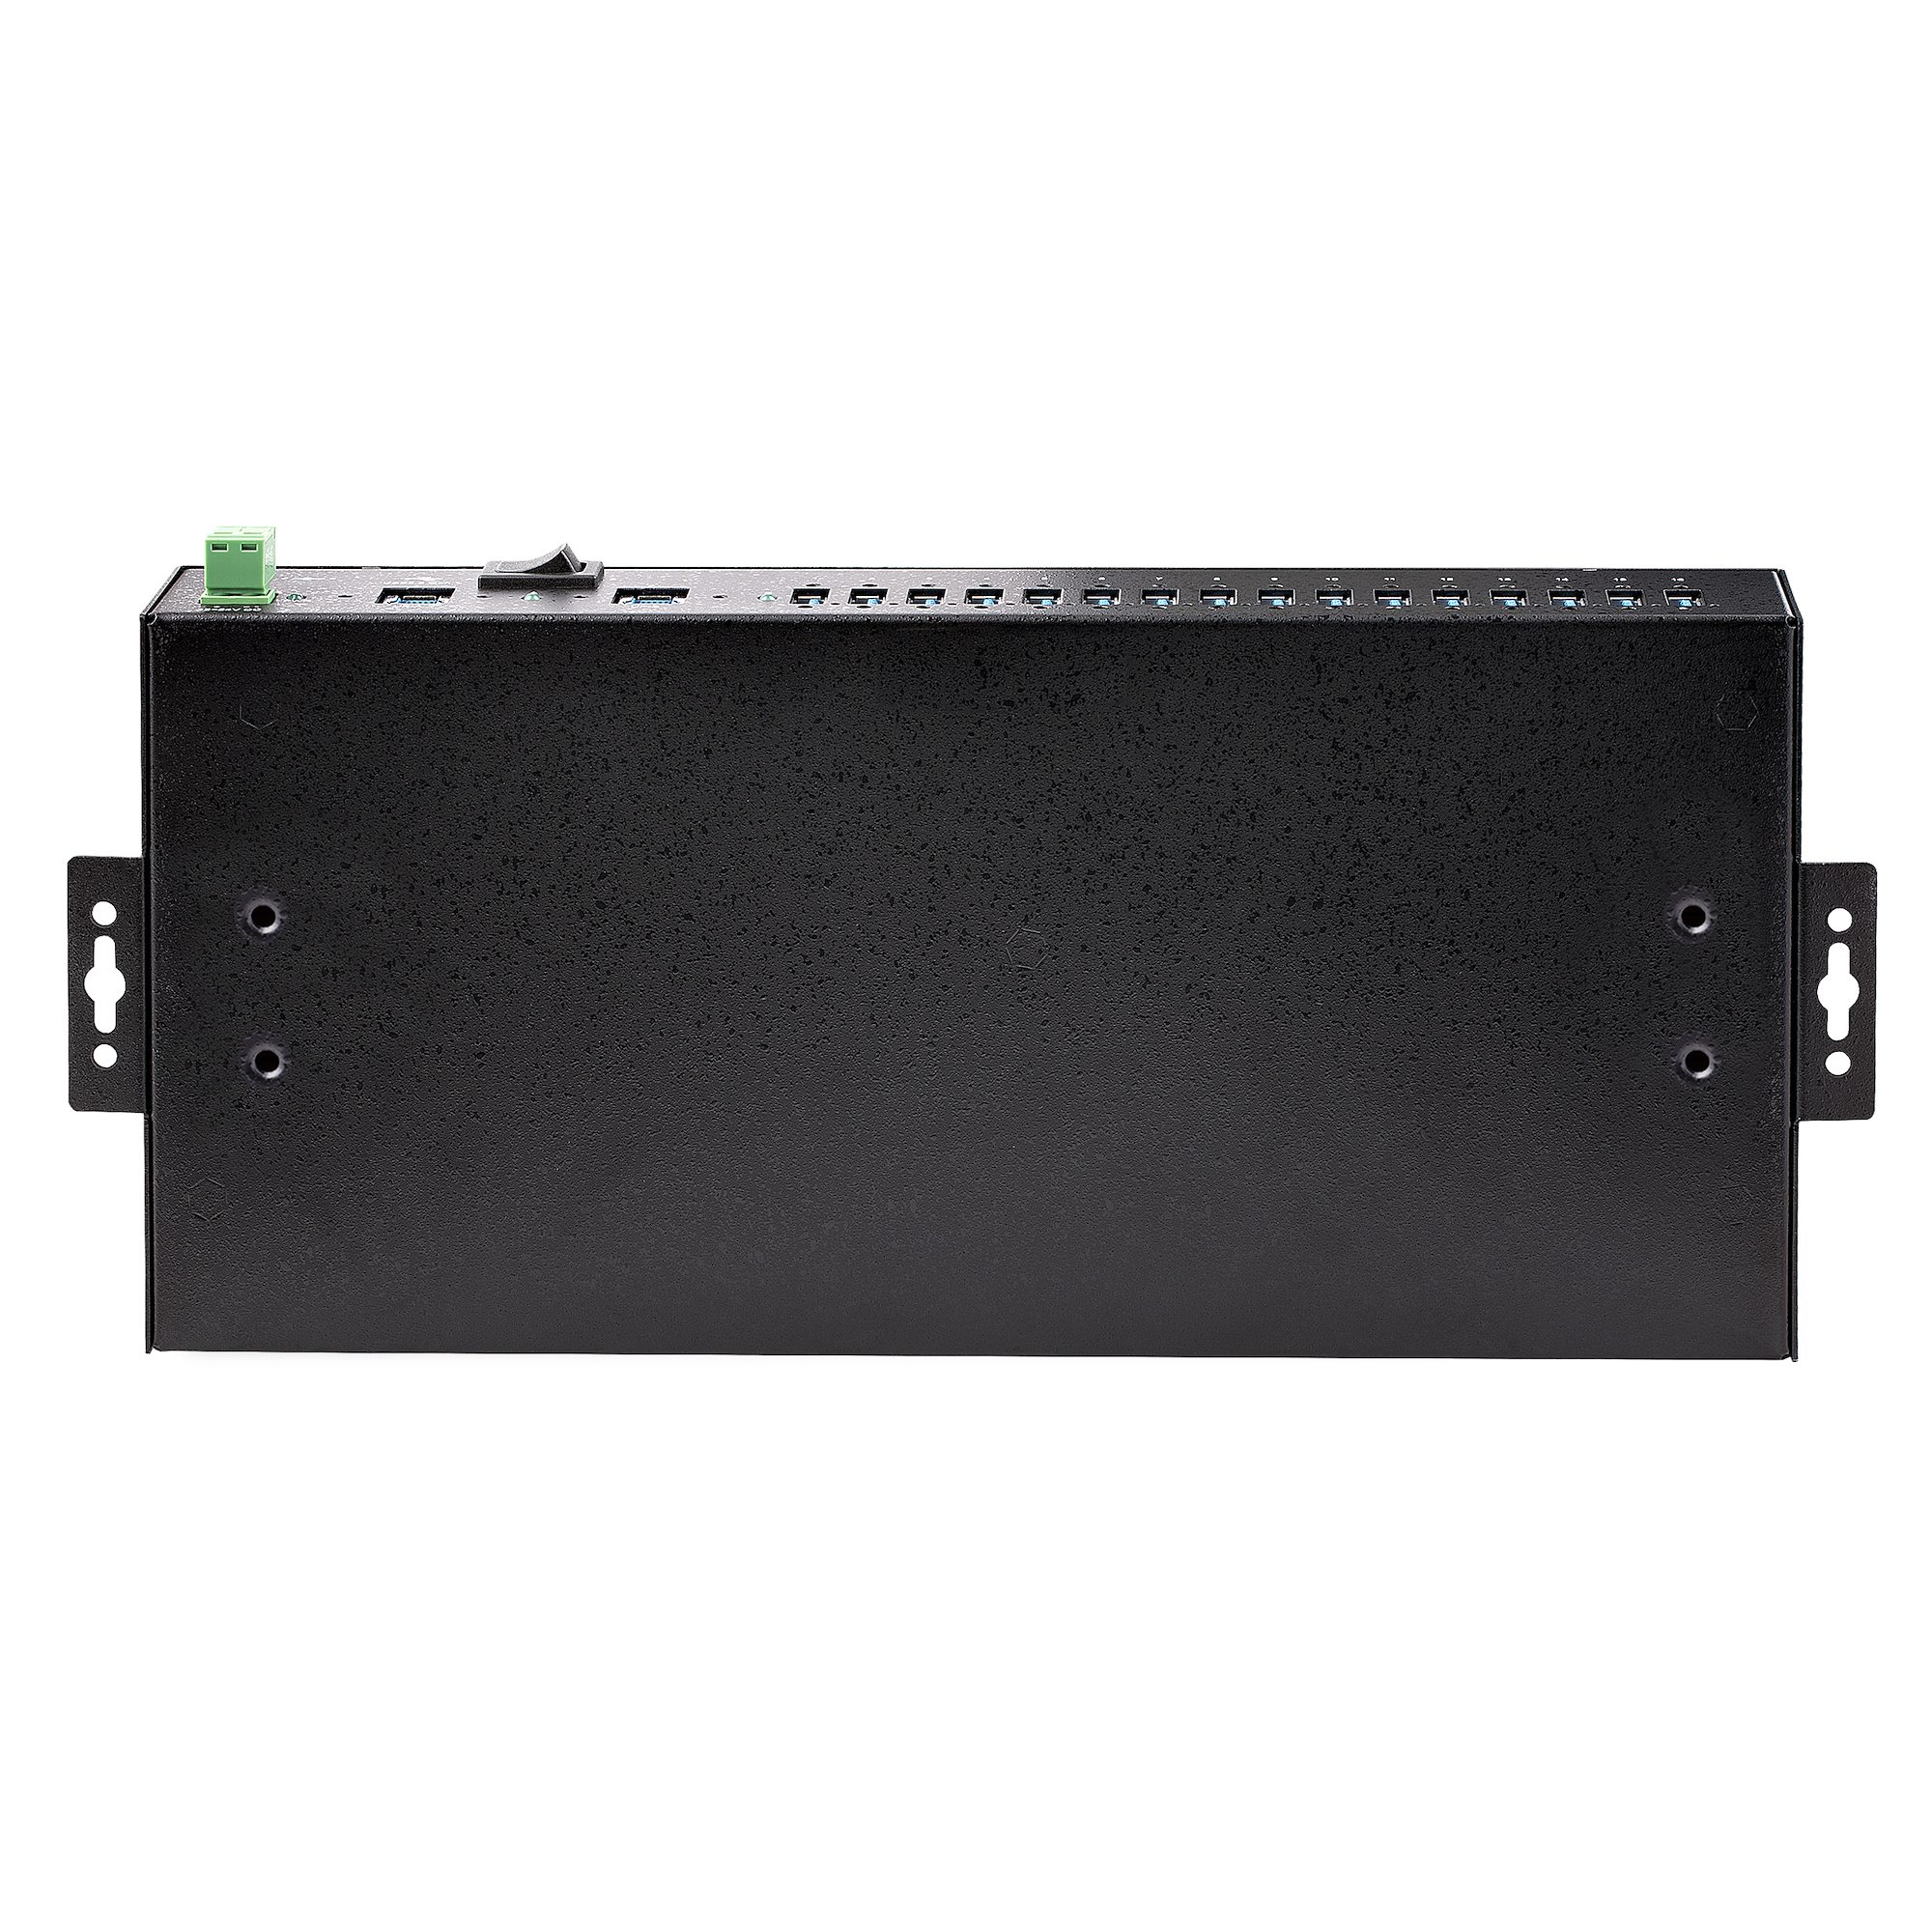 StarTech.com 16-Port Industrial USB 3.0 Hub 5Gbps, Metal, DIN/Surface/Rack Mountable, ESD Protection, Terminal Block Power, up to 120W Shared USB Charging, Dual-Host Hub/Switch